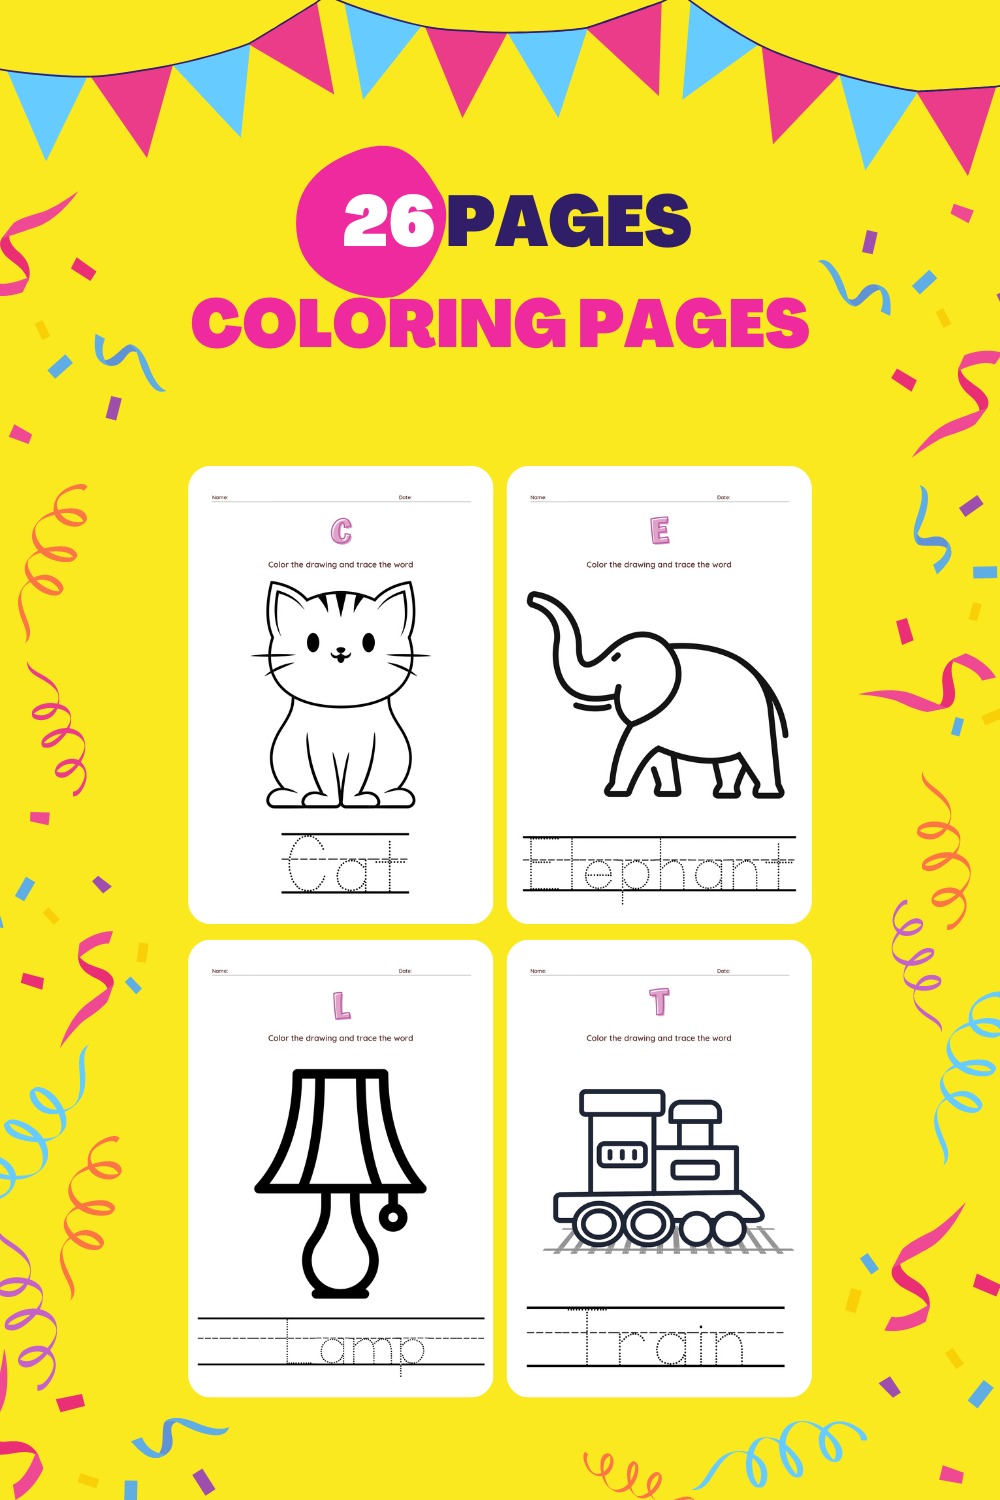 Alphabets A to Z Coloring Pages For Kids - pinterest image preview.